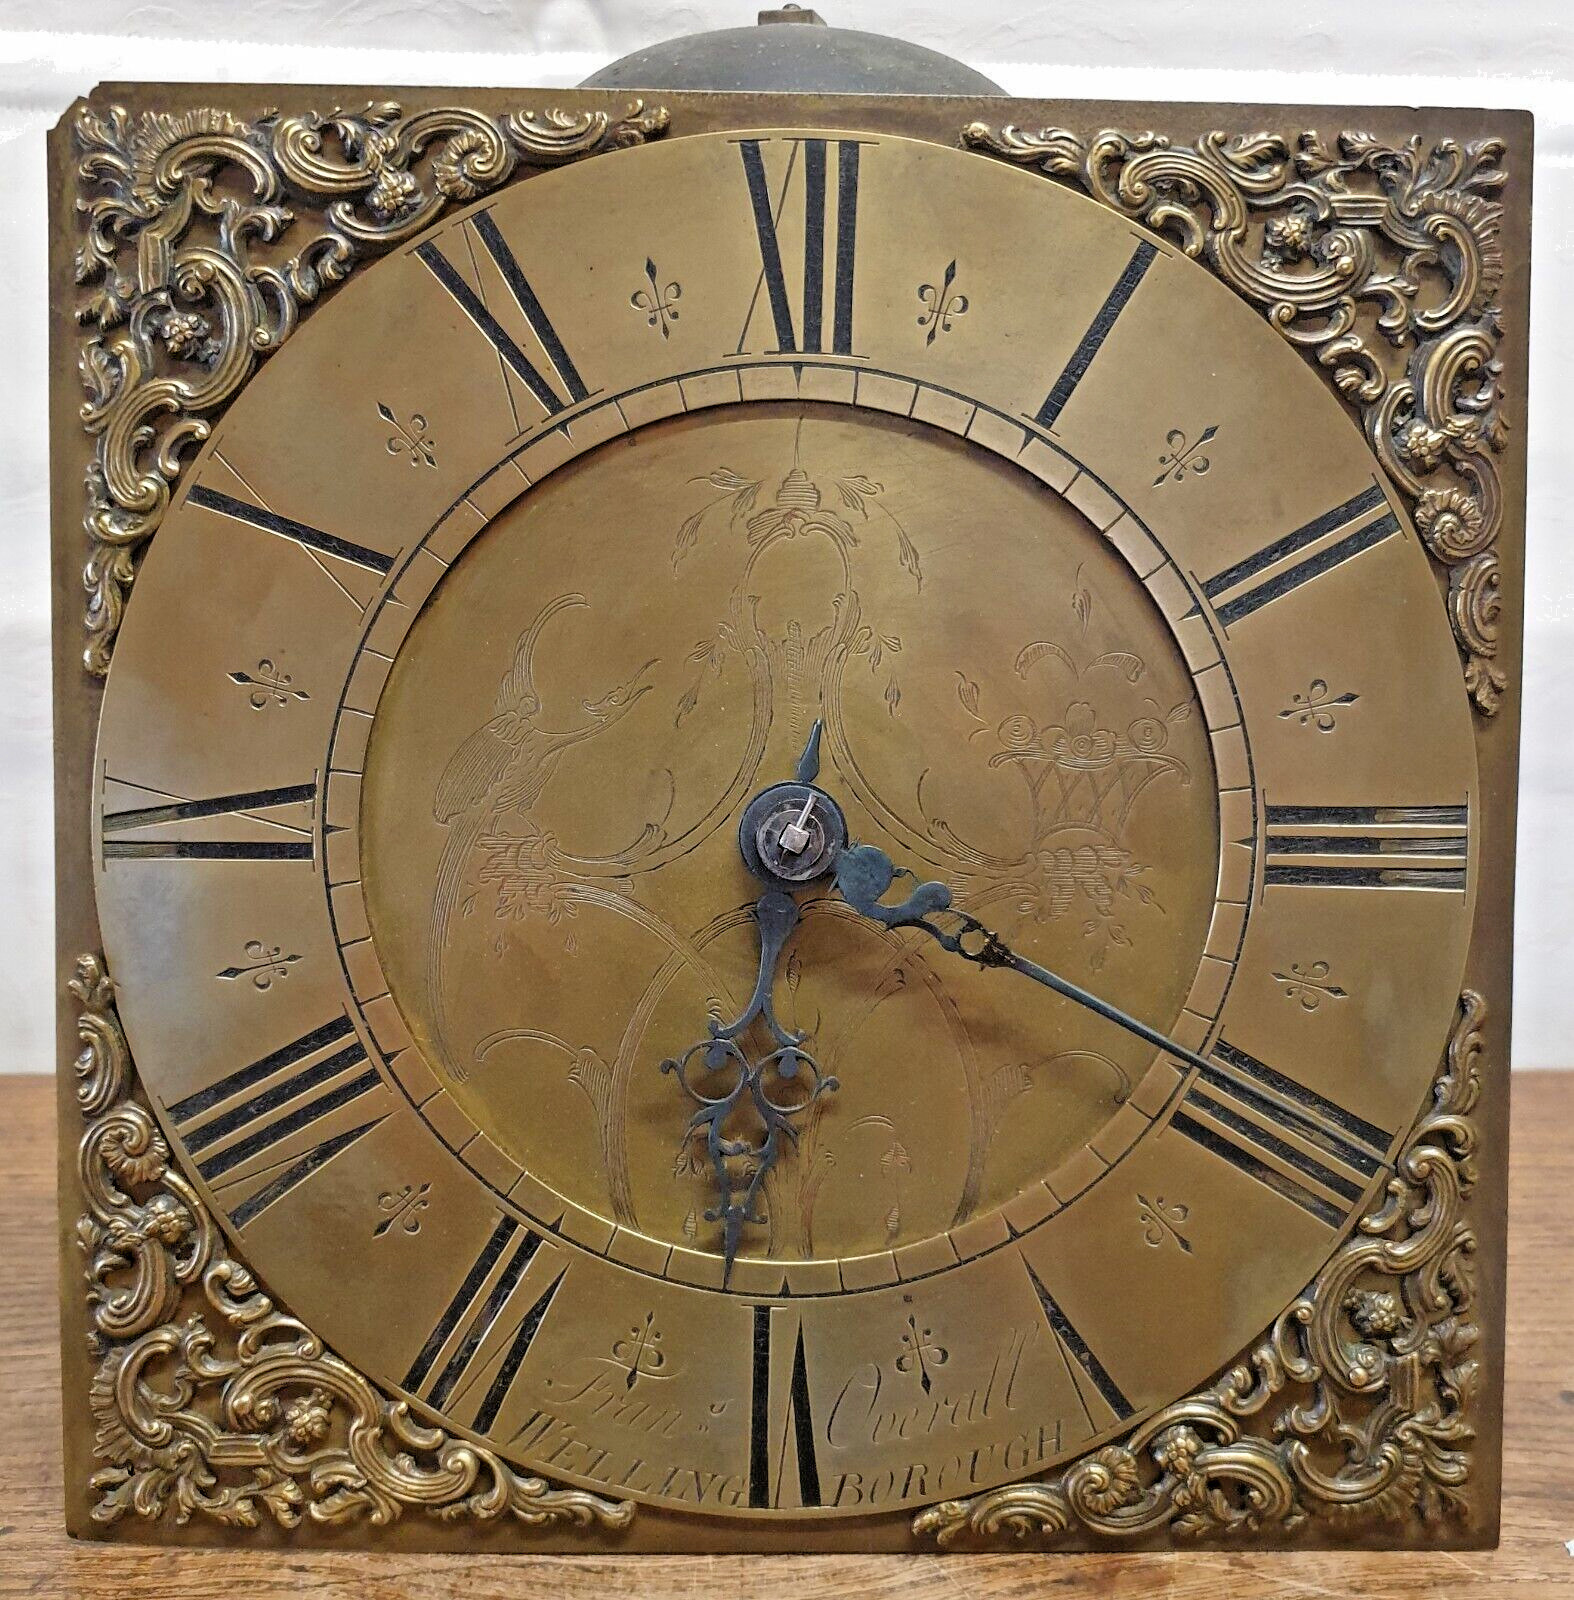 Longcase Dial & Movement - Francis Overall of Wellingborough.